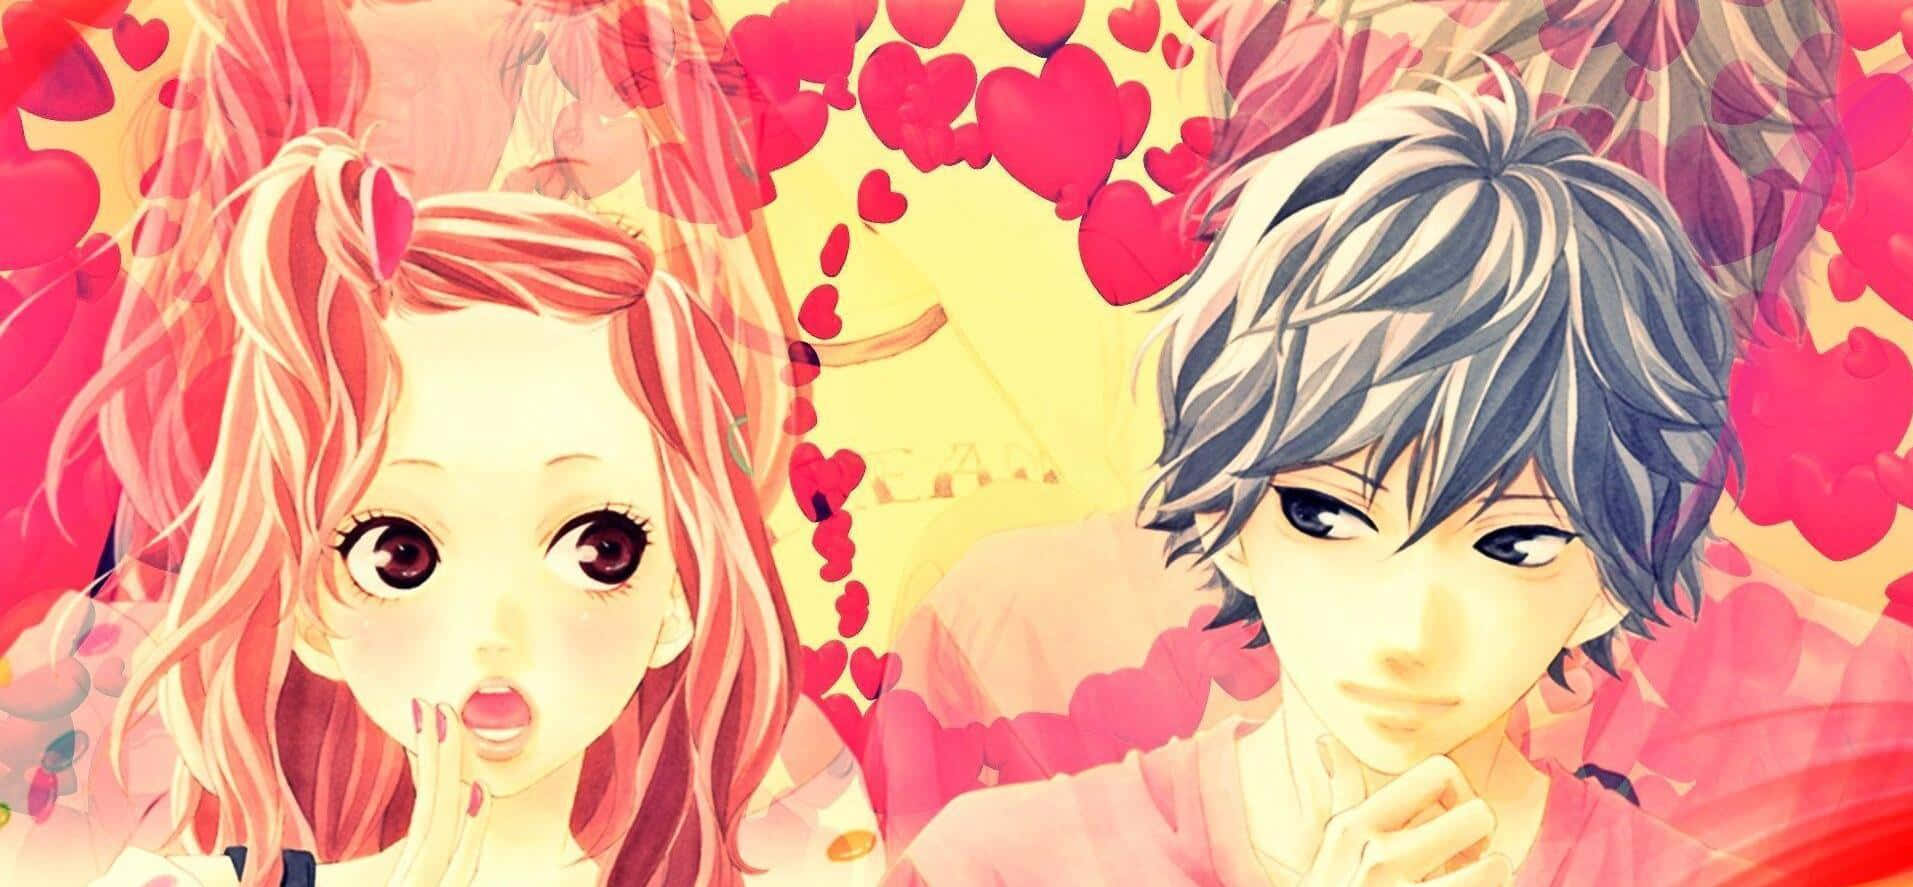 Two Anime Characters With Pink Hair And Hearts